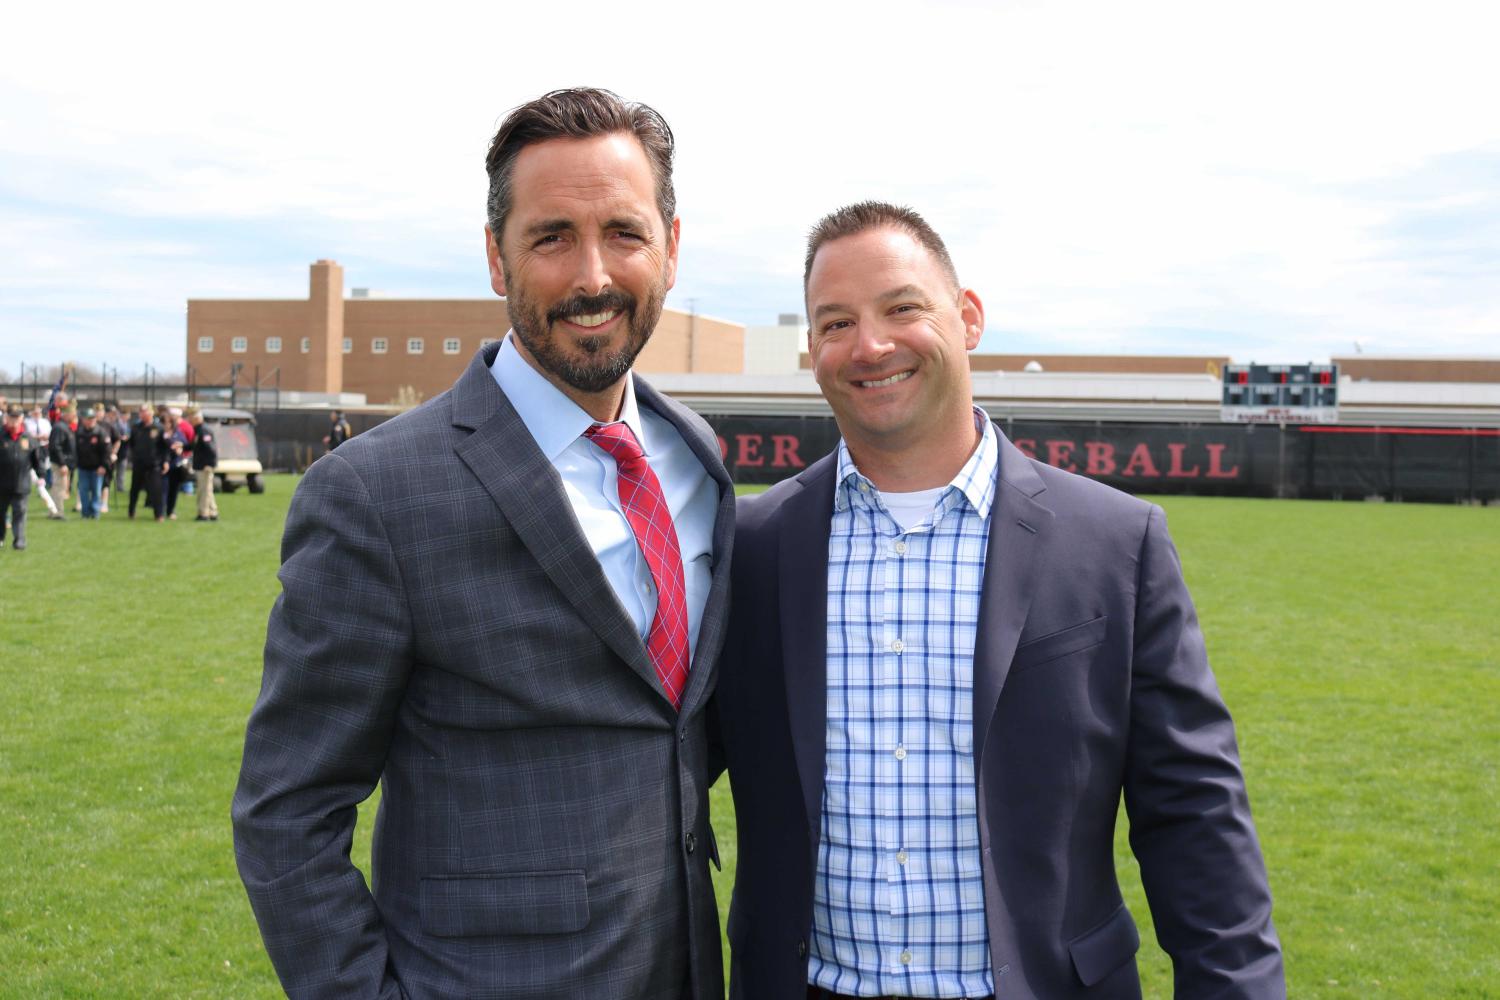 Superintendent of Patchogue-Medford School District, Dr. Hynes (left), and our new Athletic Director, Ryan Cox, pose together on the field.